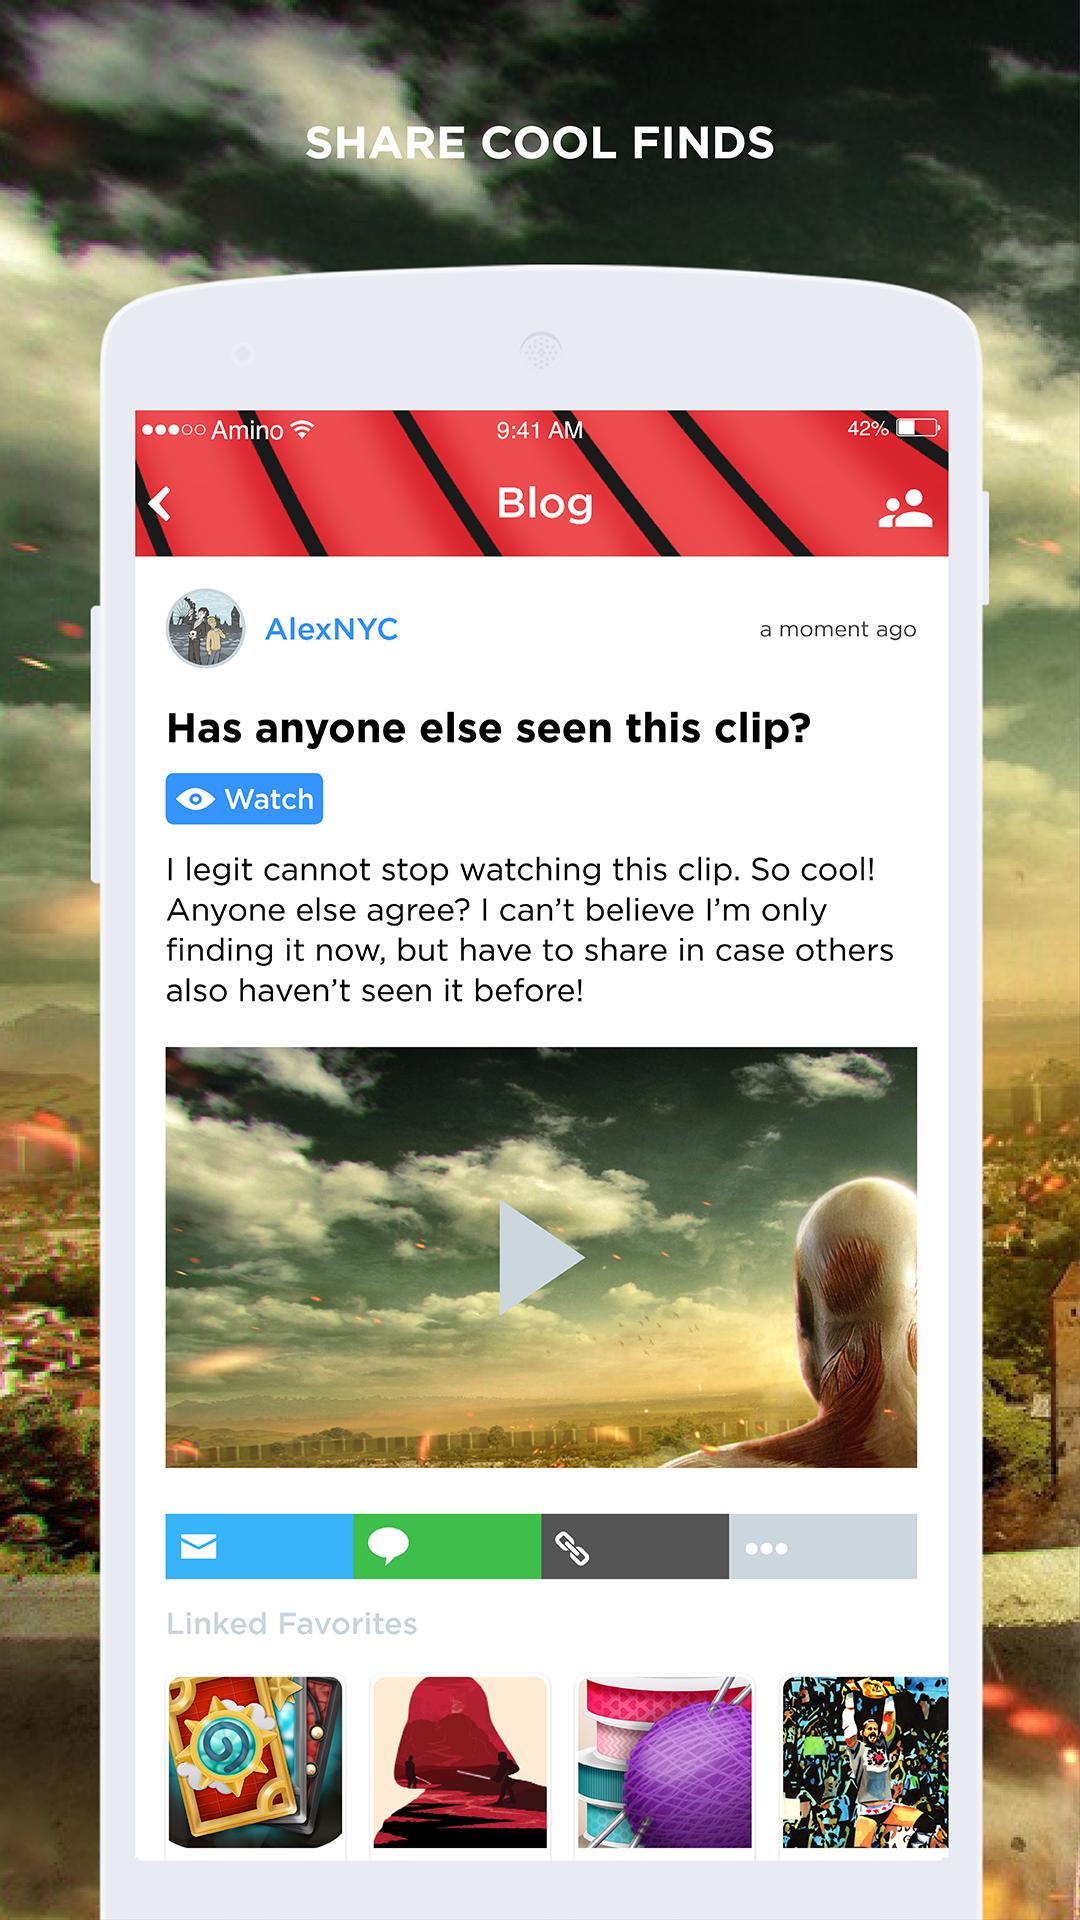 Attack On Titan Amino For Aot For Android Apk Download - stop noob abuse roblox amino